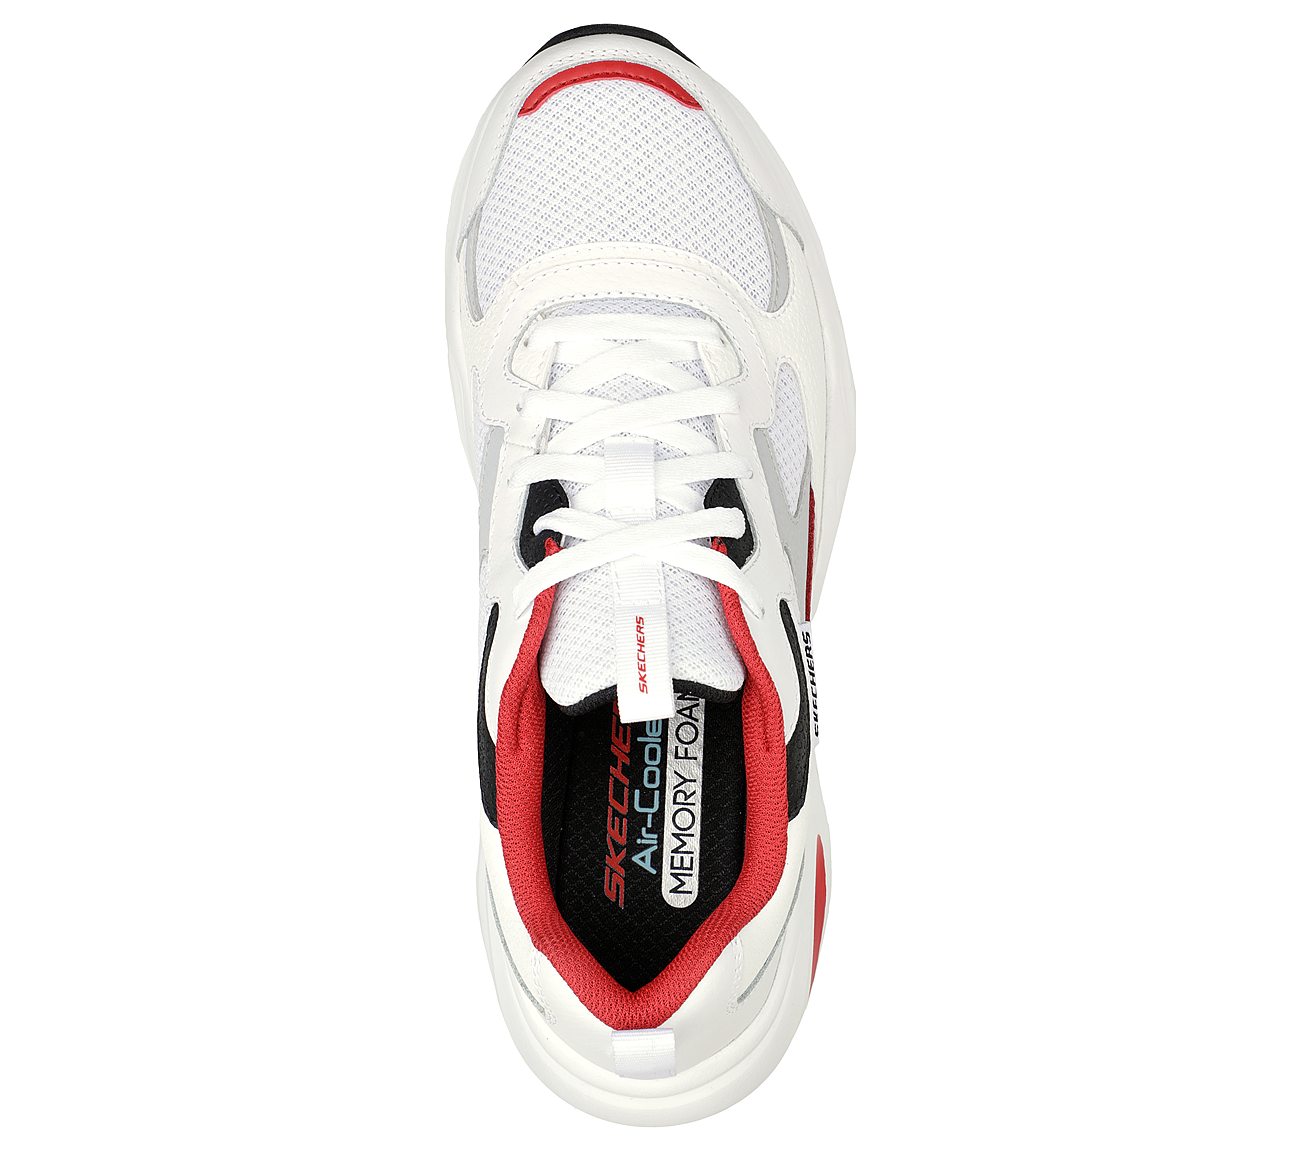 STAMINA AIRY - MOREMI, WHITE/RED Footwear Top View